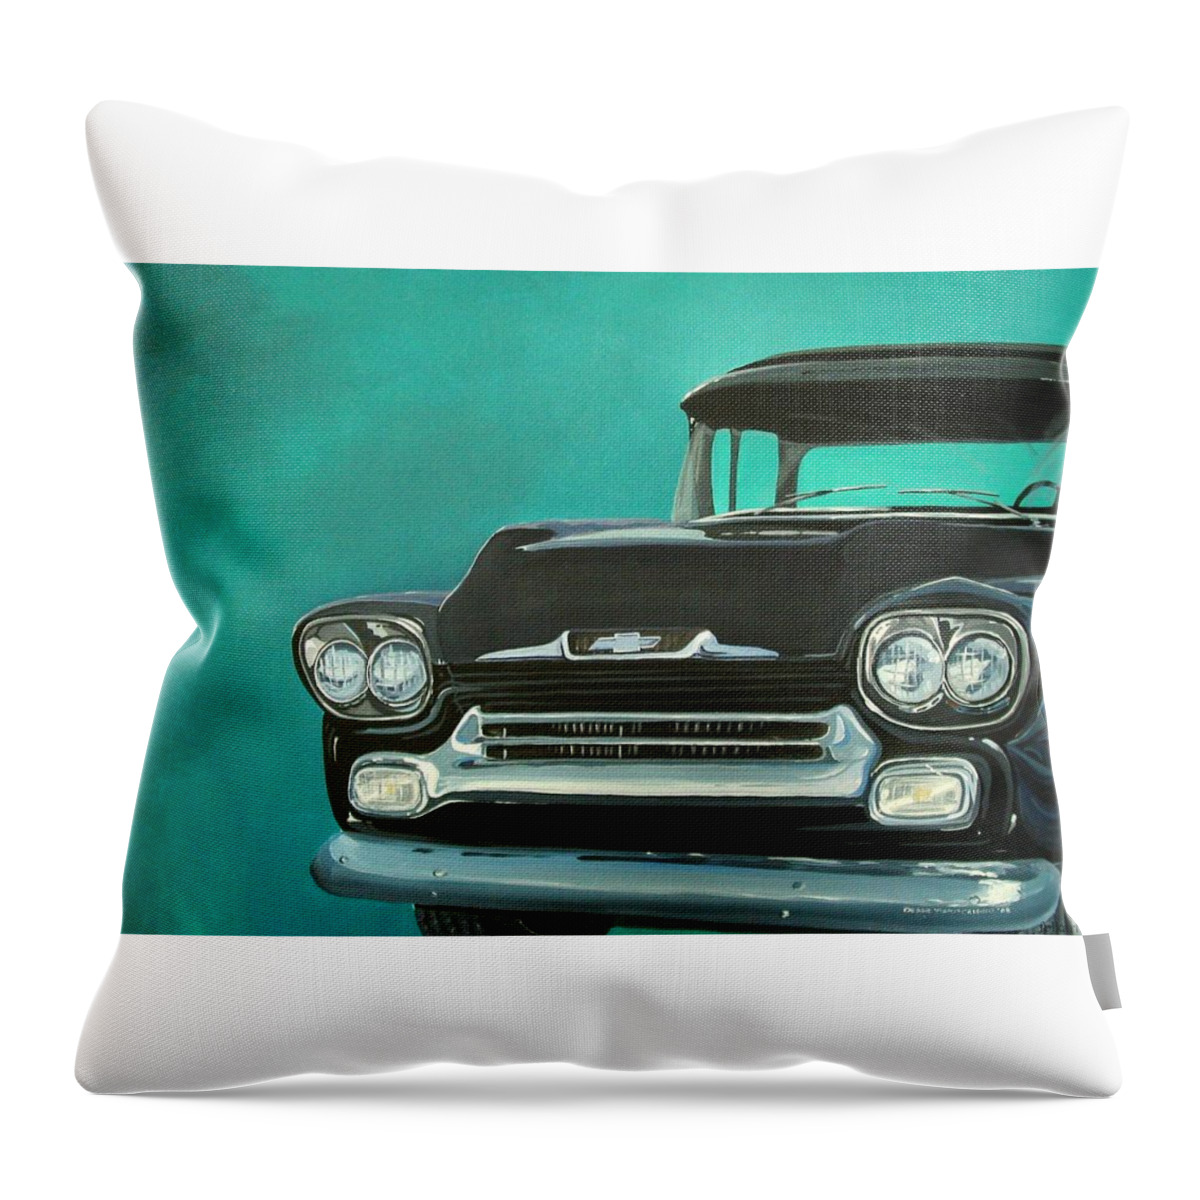 Folk Art Throw Pillow featuring the painting 1957 Apache Truck by Debbie Criswell